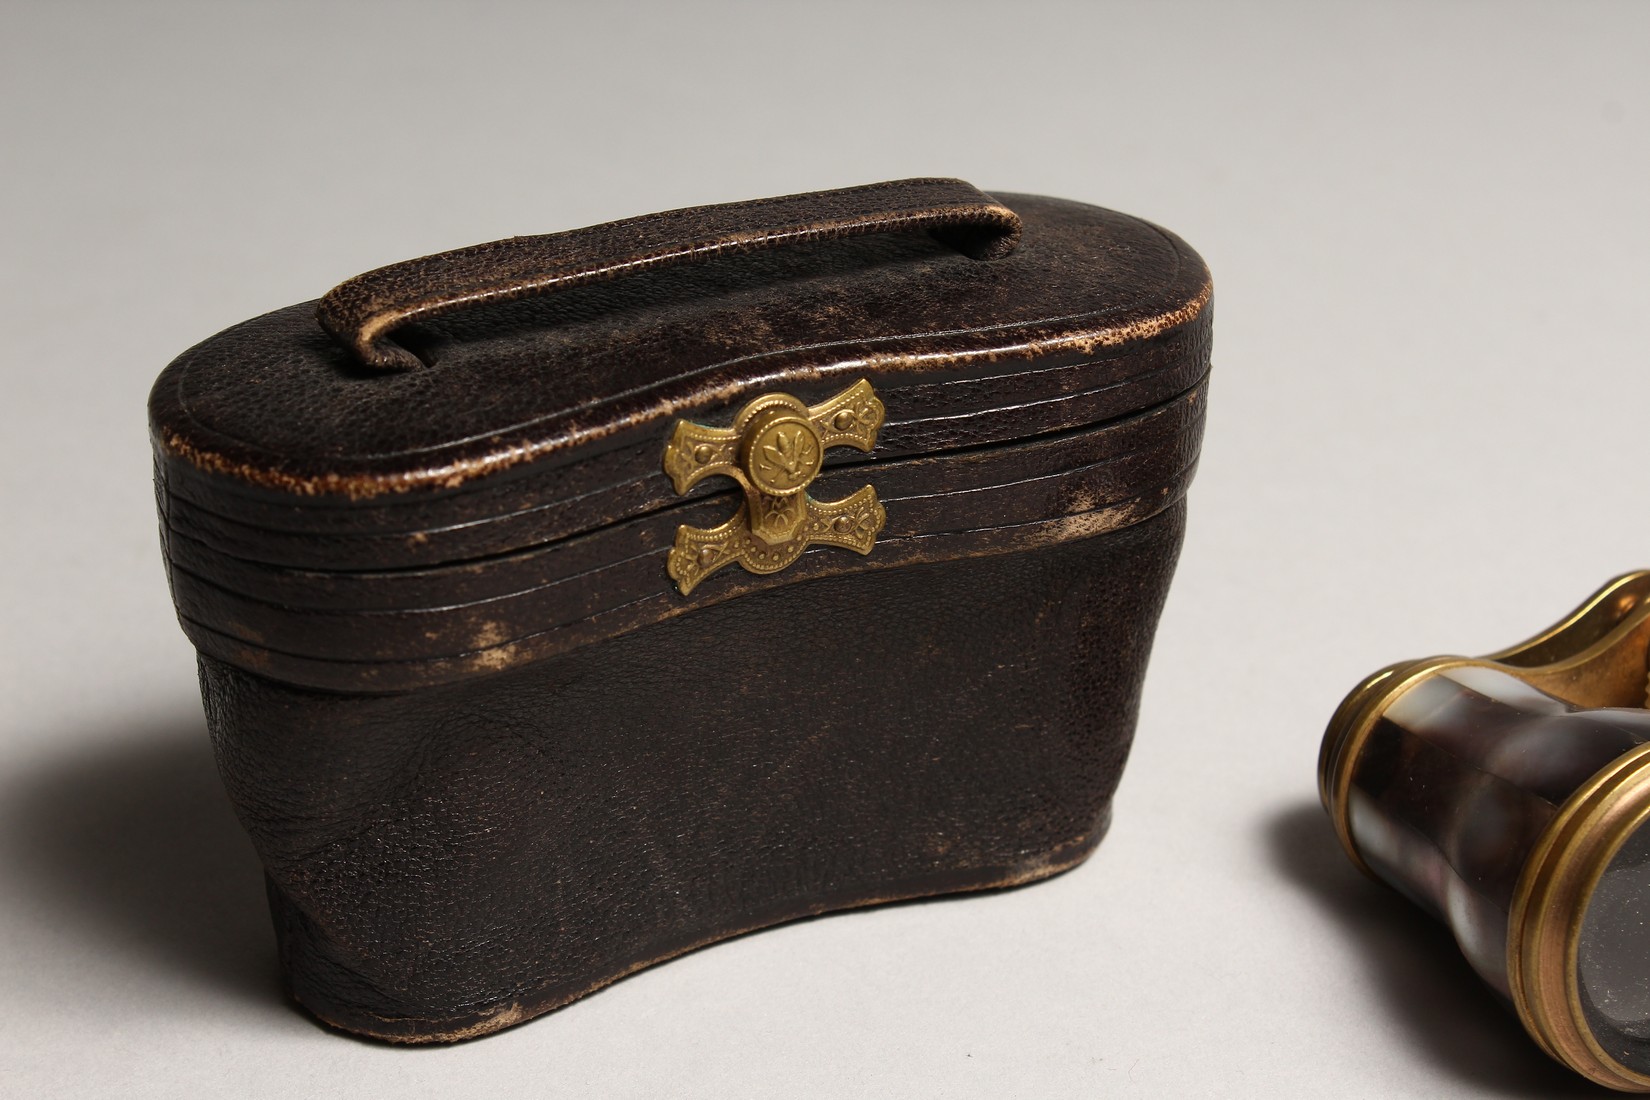 A PAIR OF MOTHER OF PEARL AND GILT OPERA GLASSES 4ins in a leather case. - Image 6 of 7